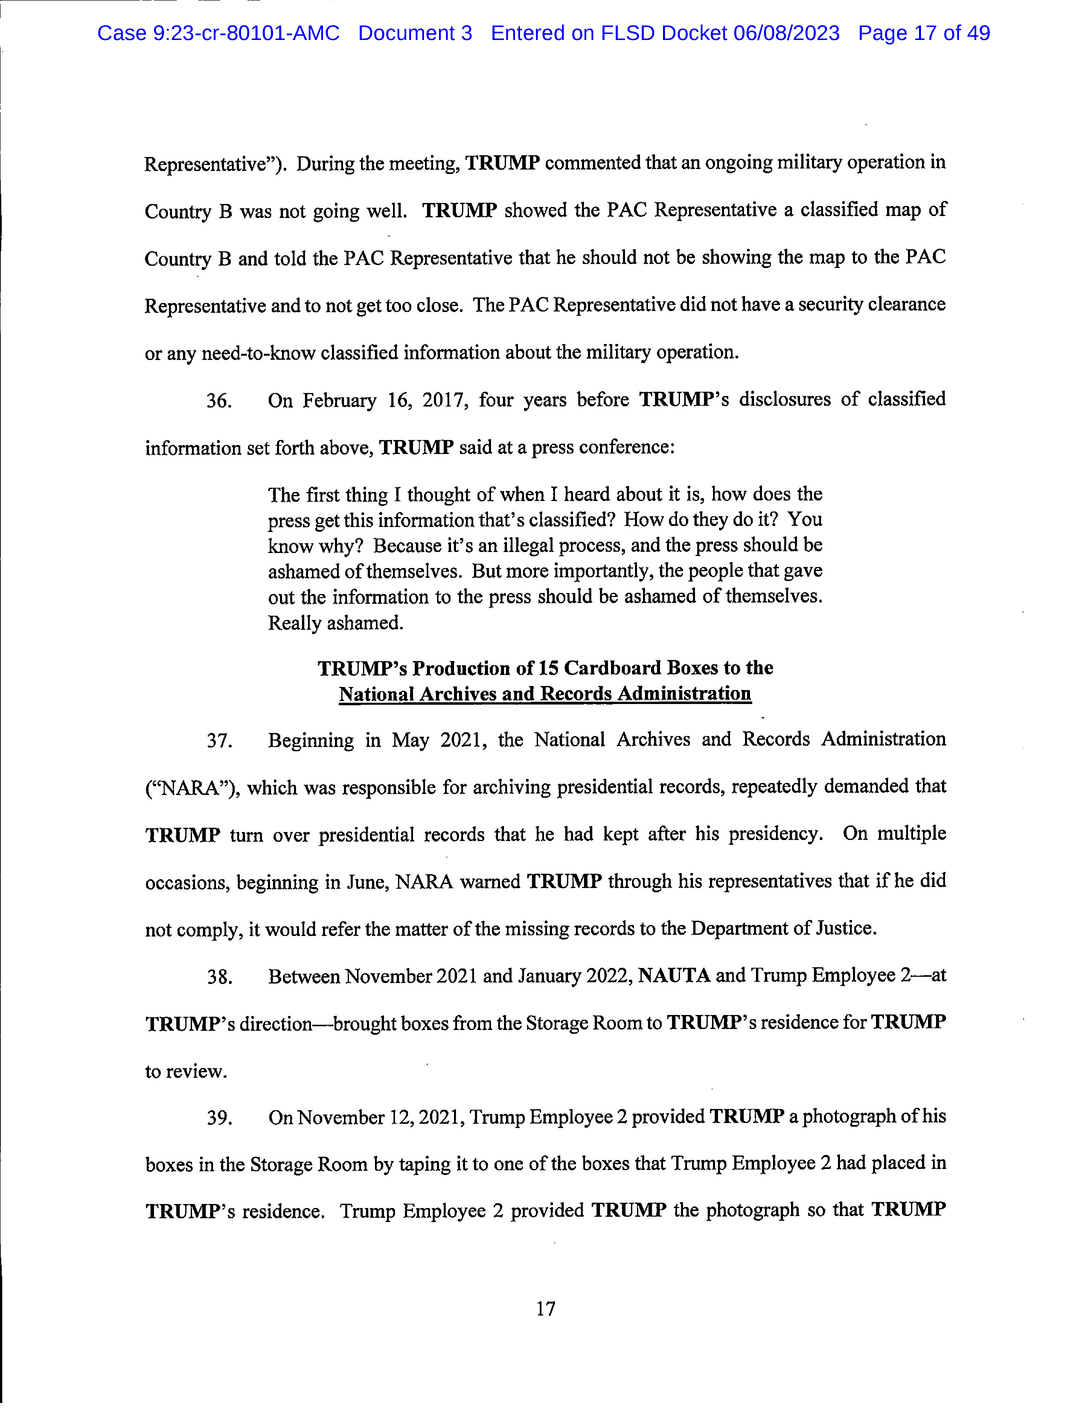 Page 17 of Donald Trump Classified Documents Indictment PDF document.